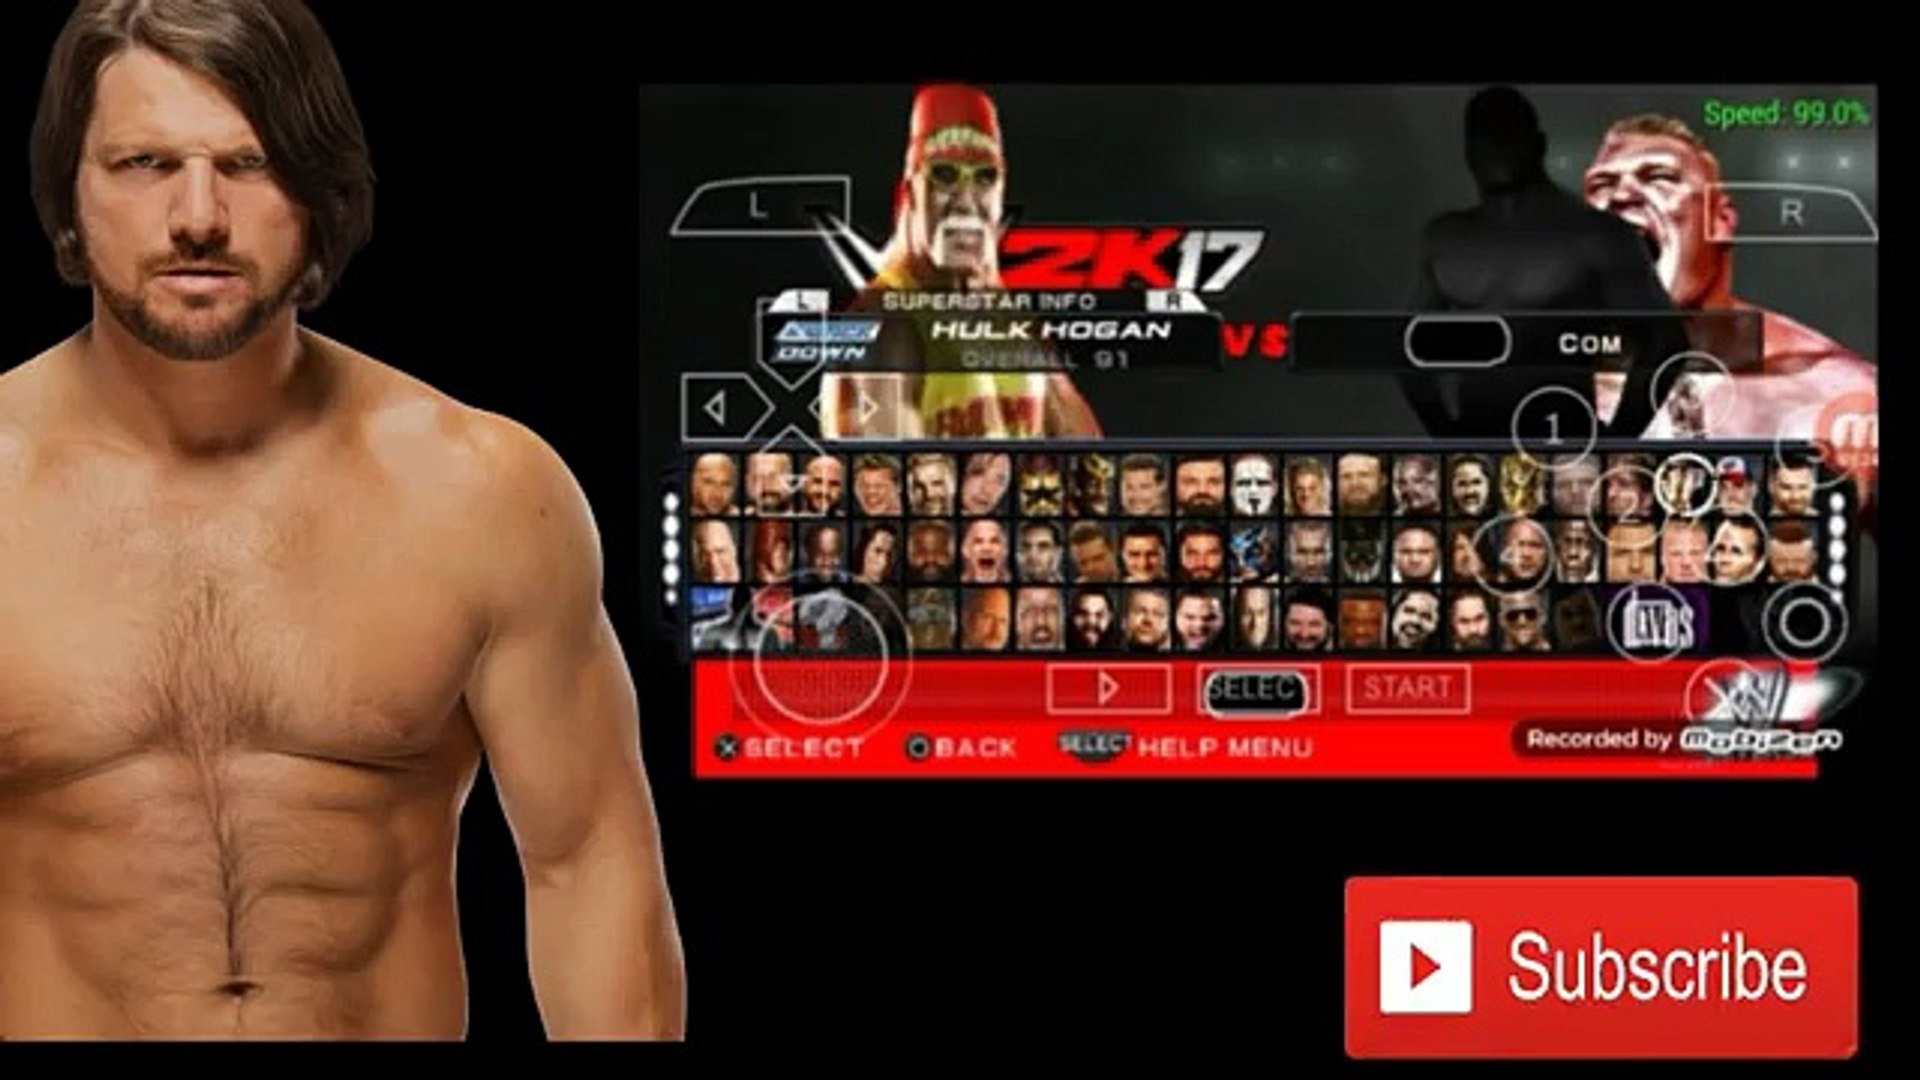 Download wwe 2k15 for ppsspp android highly compressed